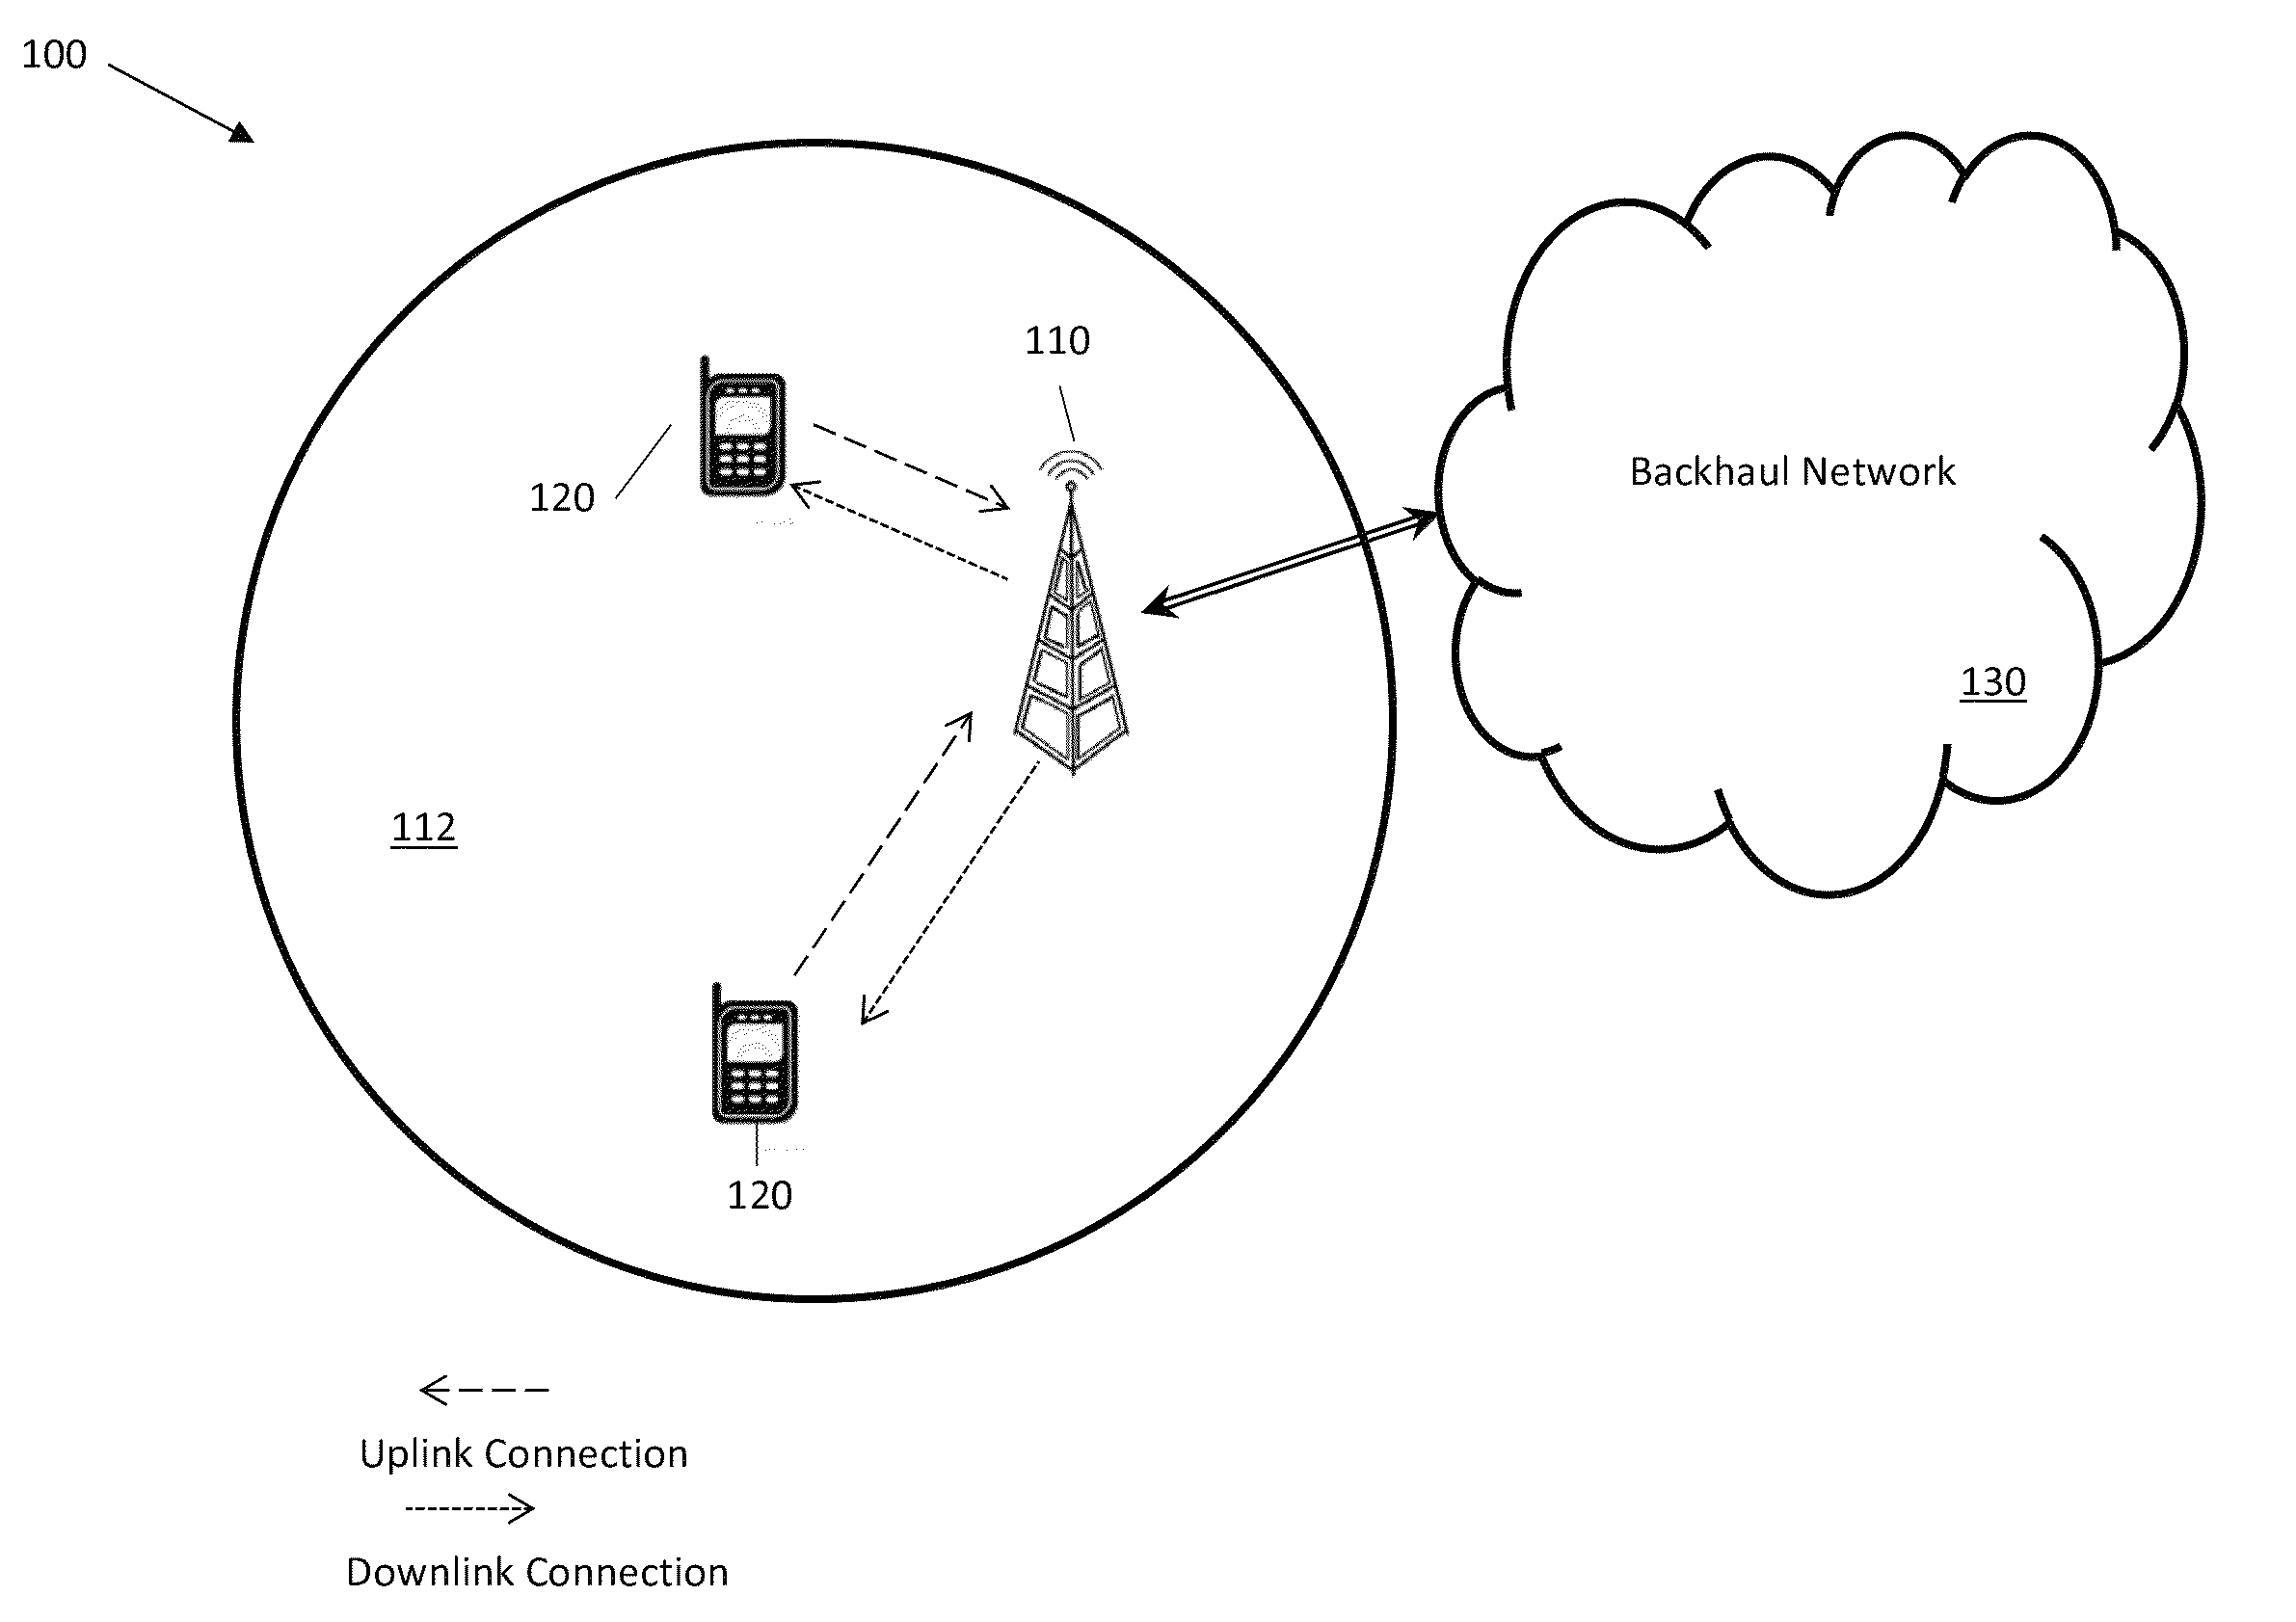 Coordinated multipoint (COMP) techniques for reducing downlink interference from uplink signals